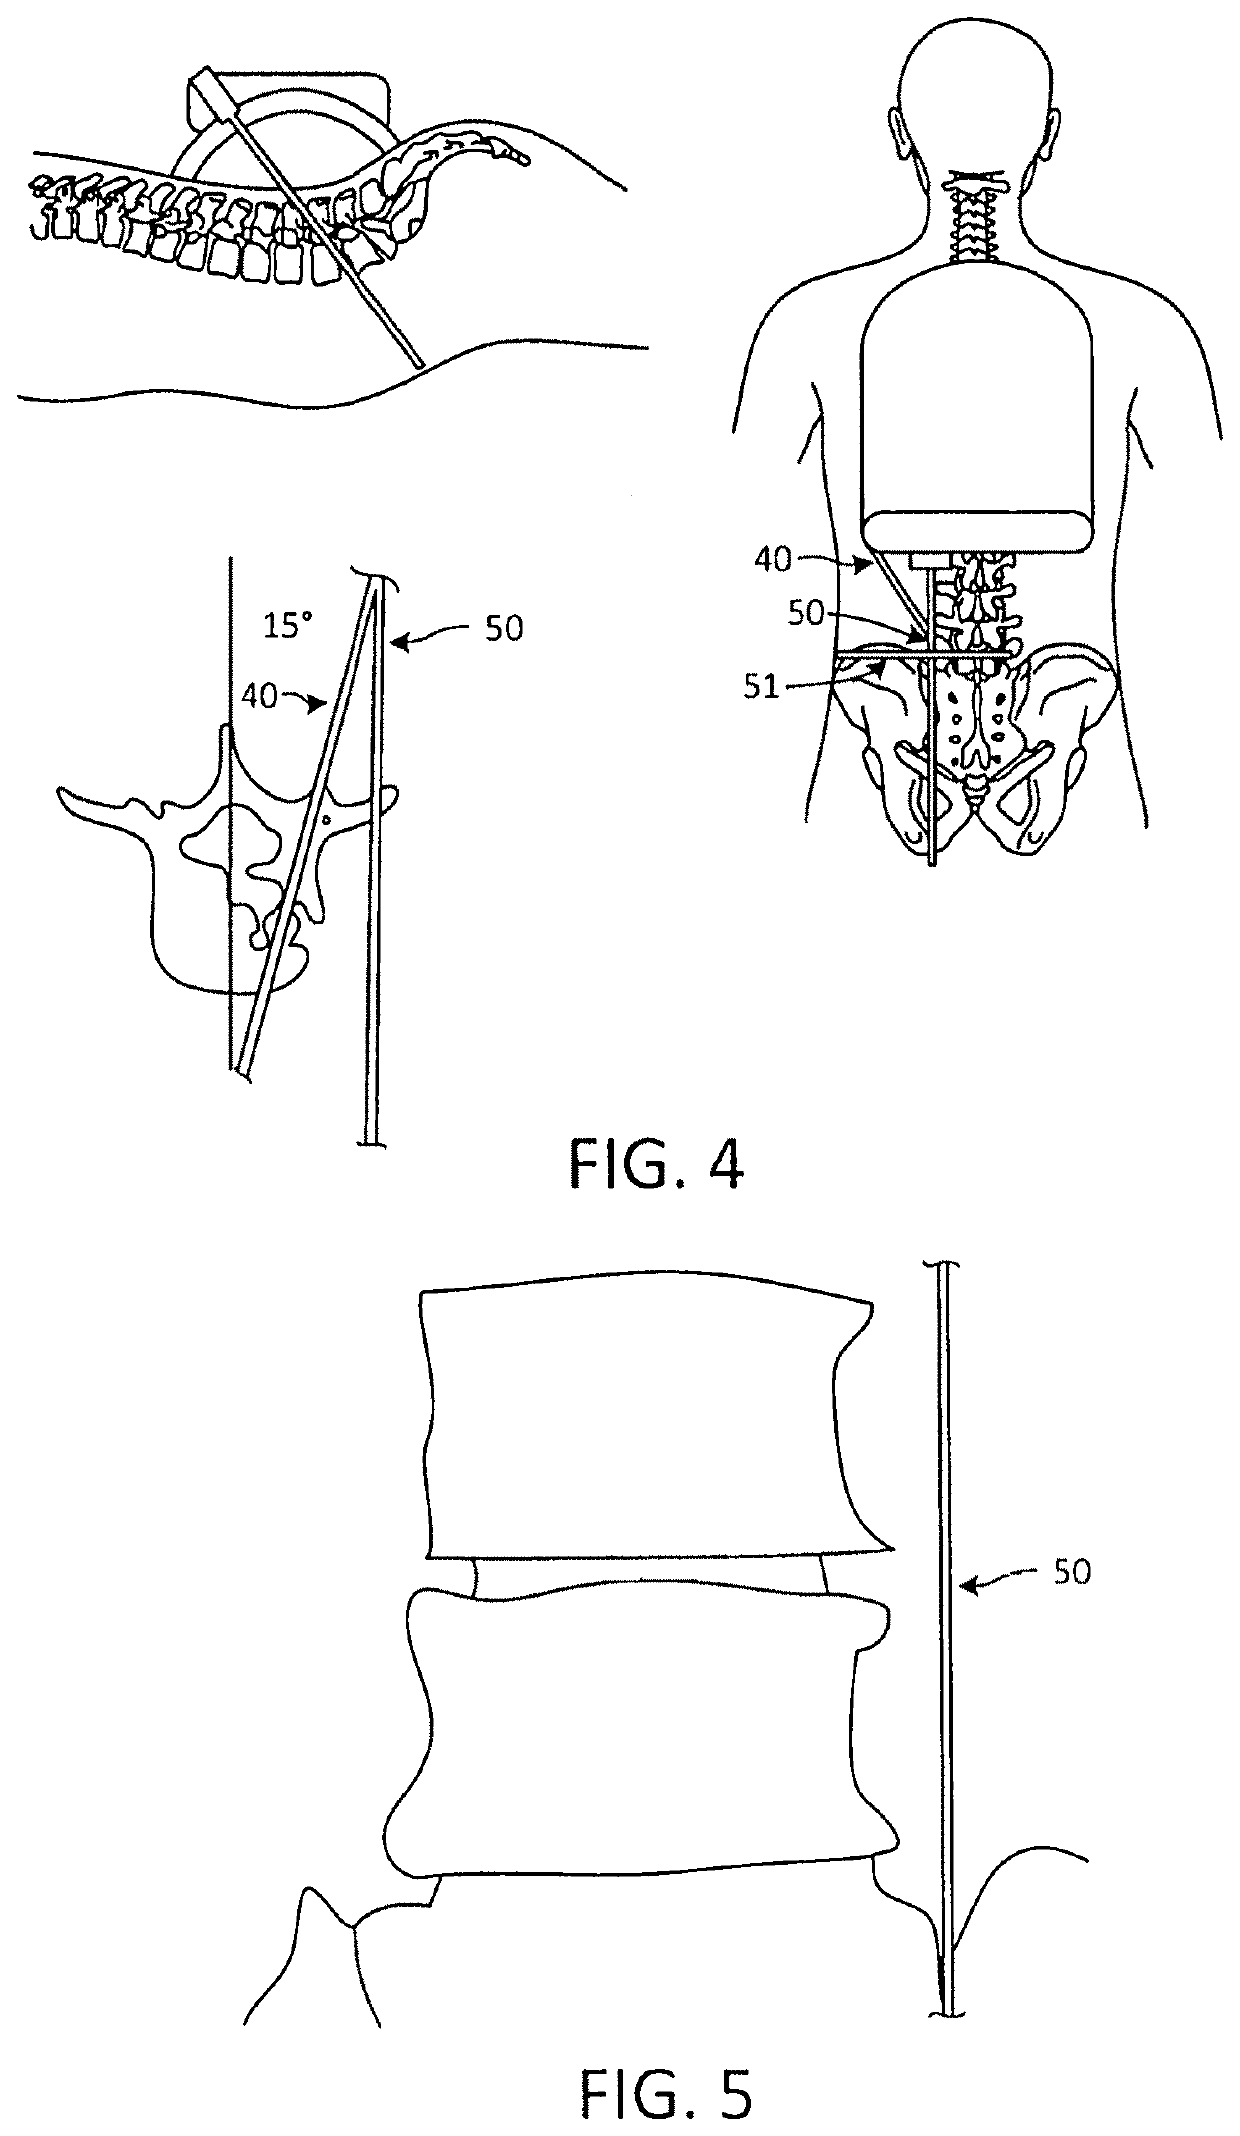 Surgical targeting systems and methods